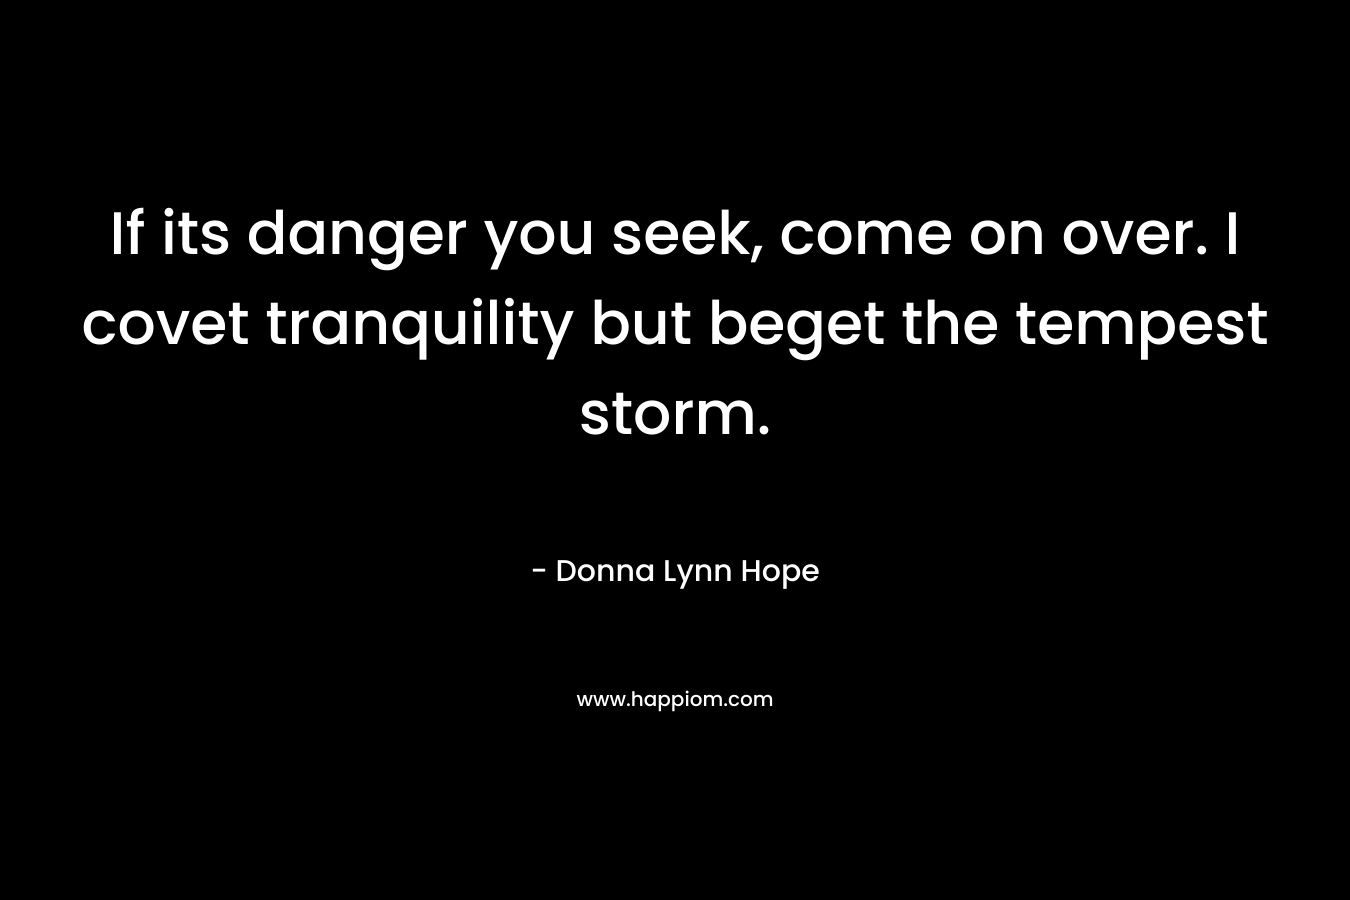 If its danger you seek, come on over. I covet tranquility but beget the tempest storm. – Donna Lynn Hope